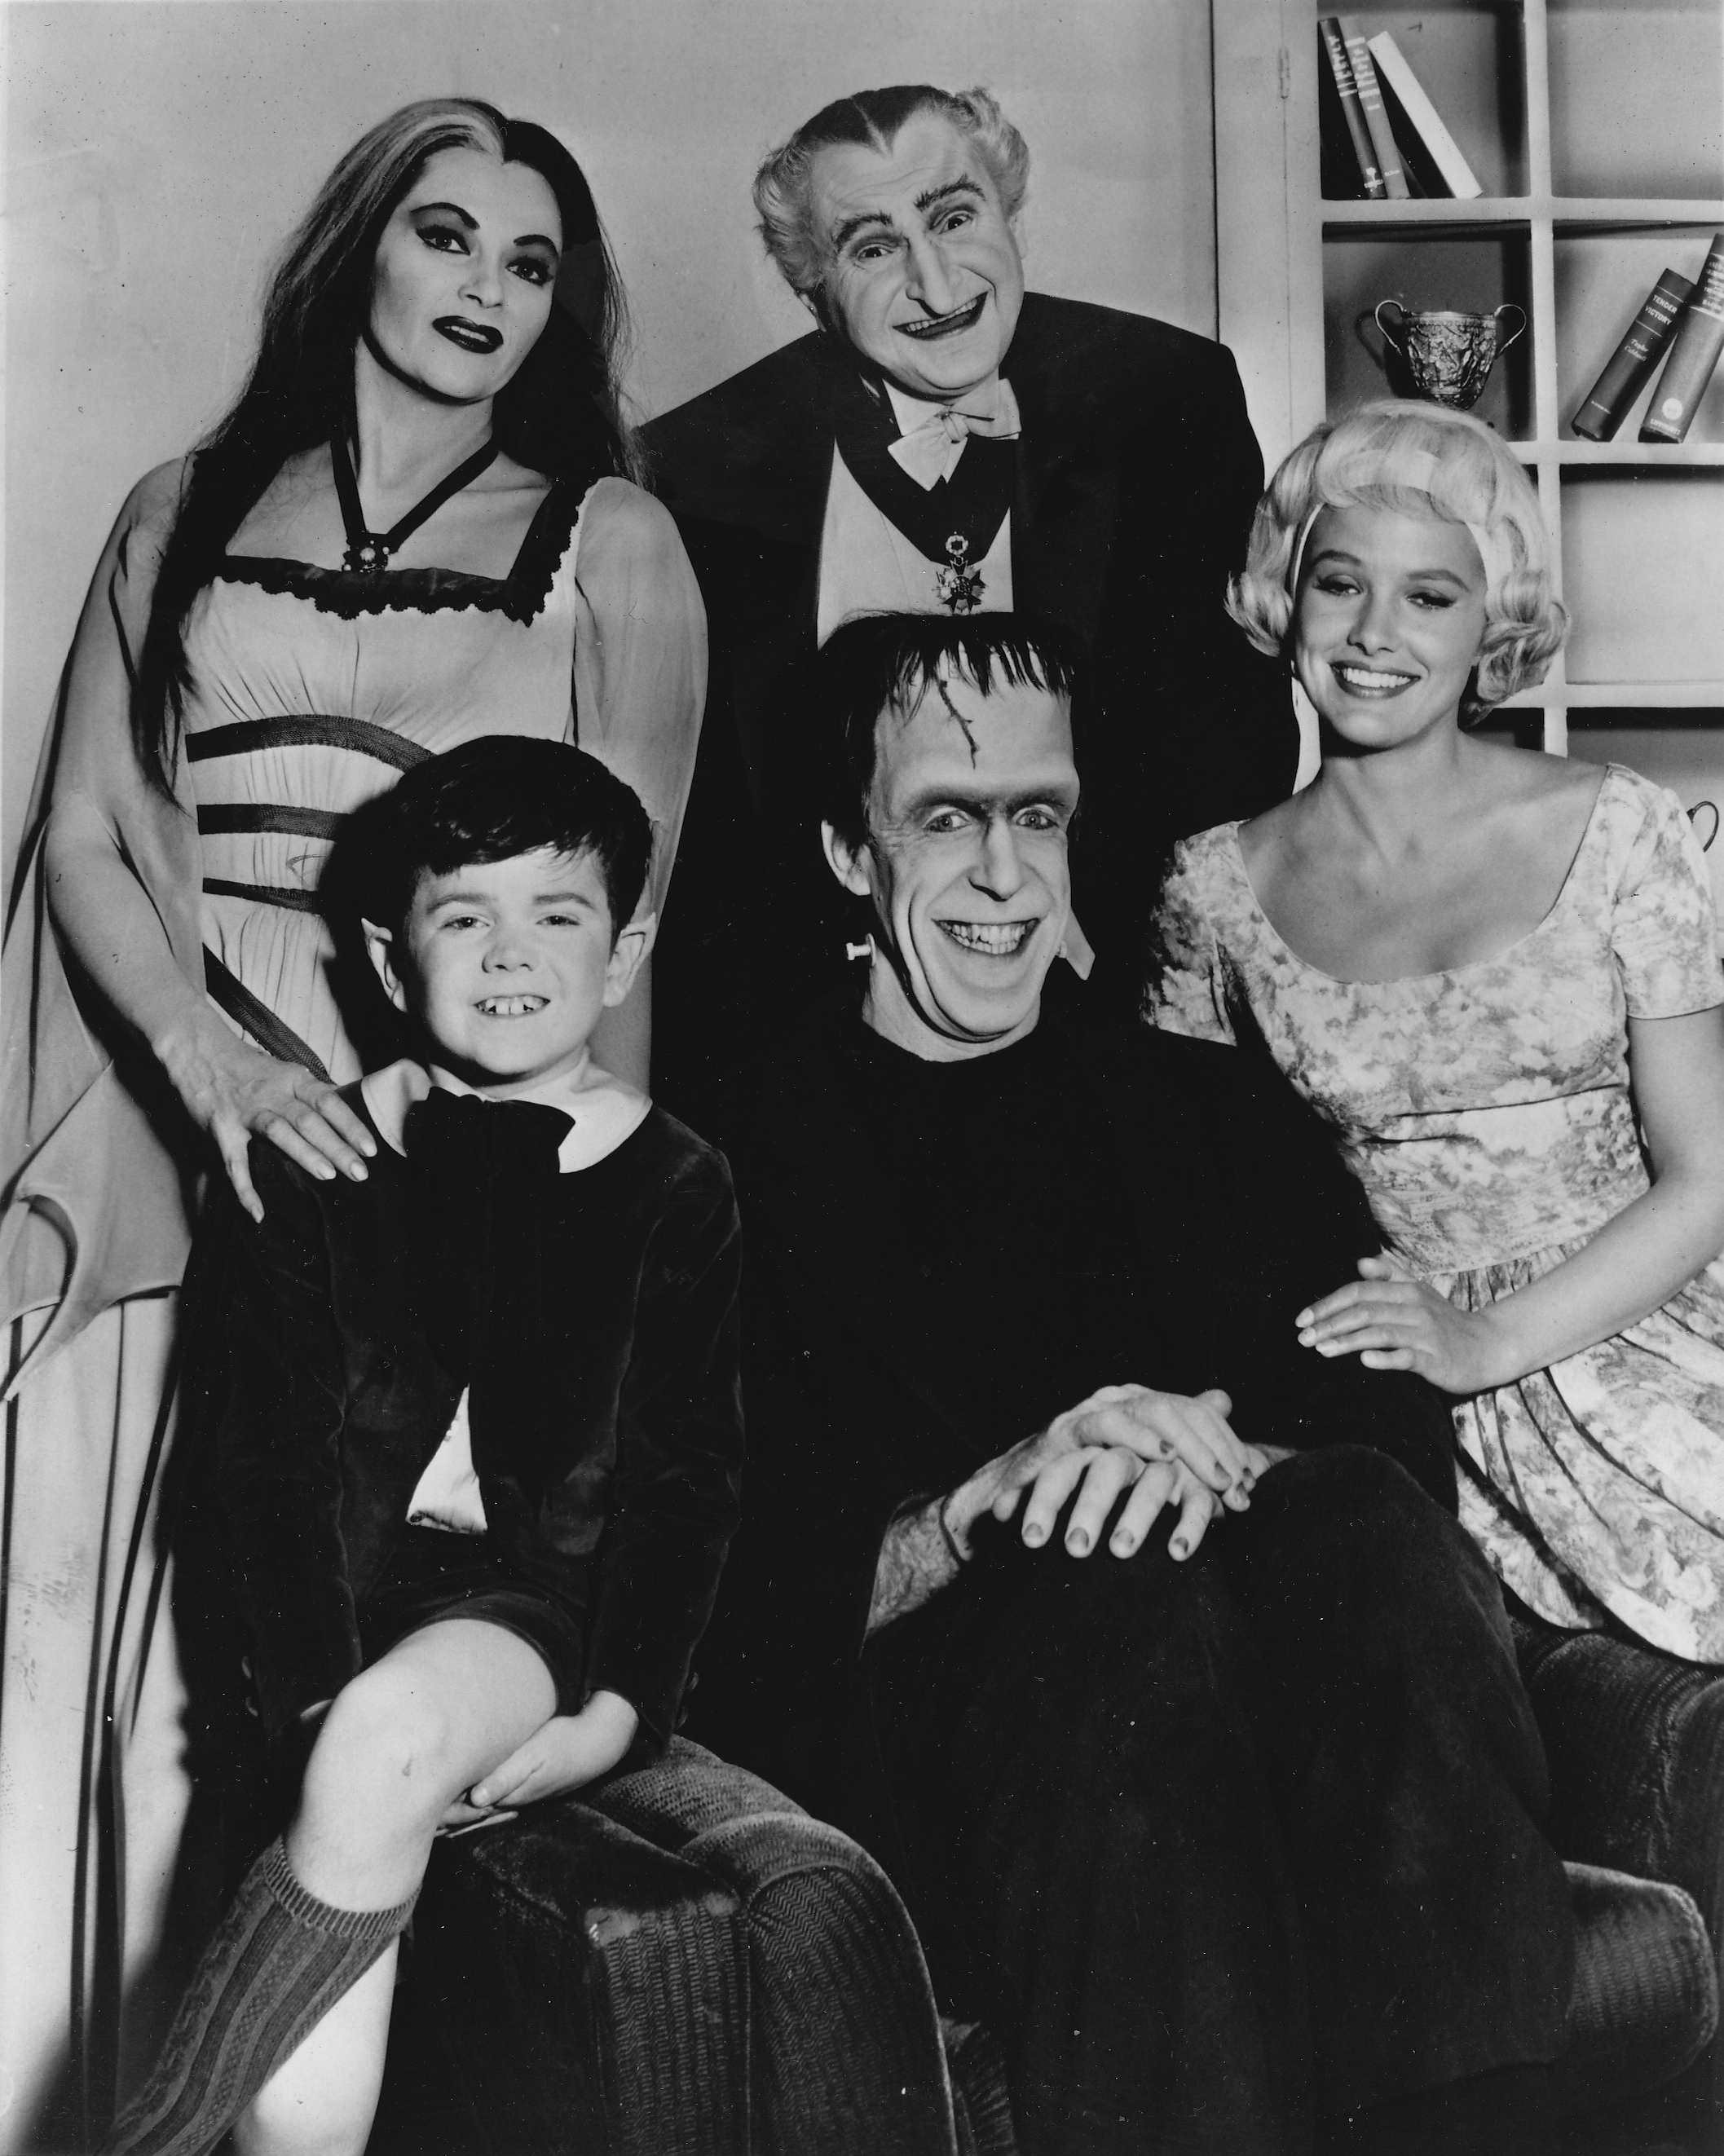 HQ The Munsters Wallpapers | File 2609.52Kb